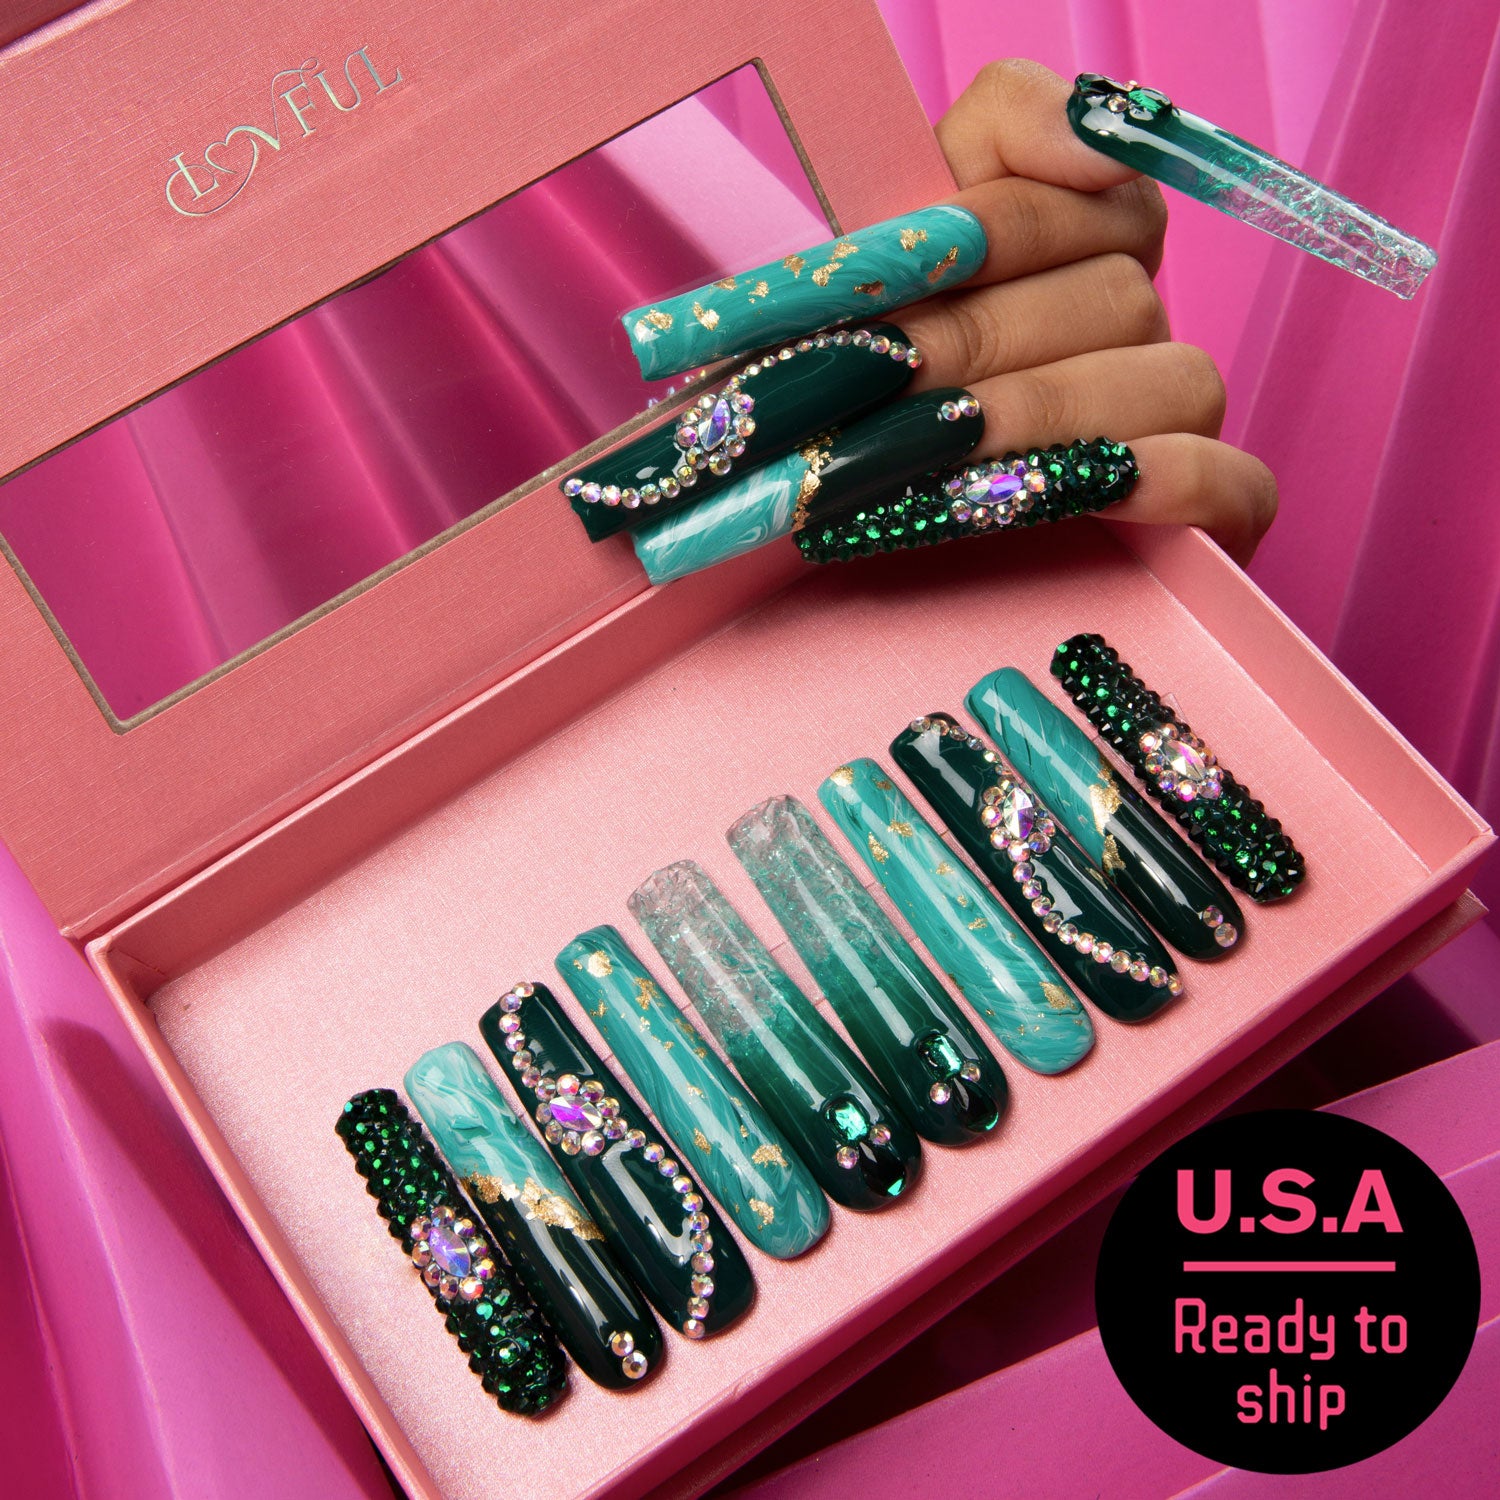 Emerald Envy square-shaped press-on nails in various shades of green with intricate gold designs and embellishments inside pink packaging box. The nails feature sparkling accents and gemstone decorations, capturing the essence of nature's splendor. U.S.A. Ready to ship.